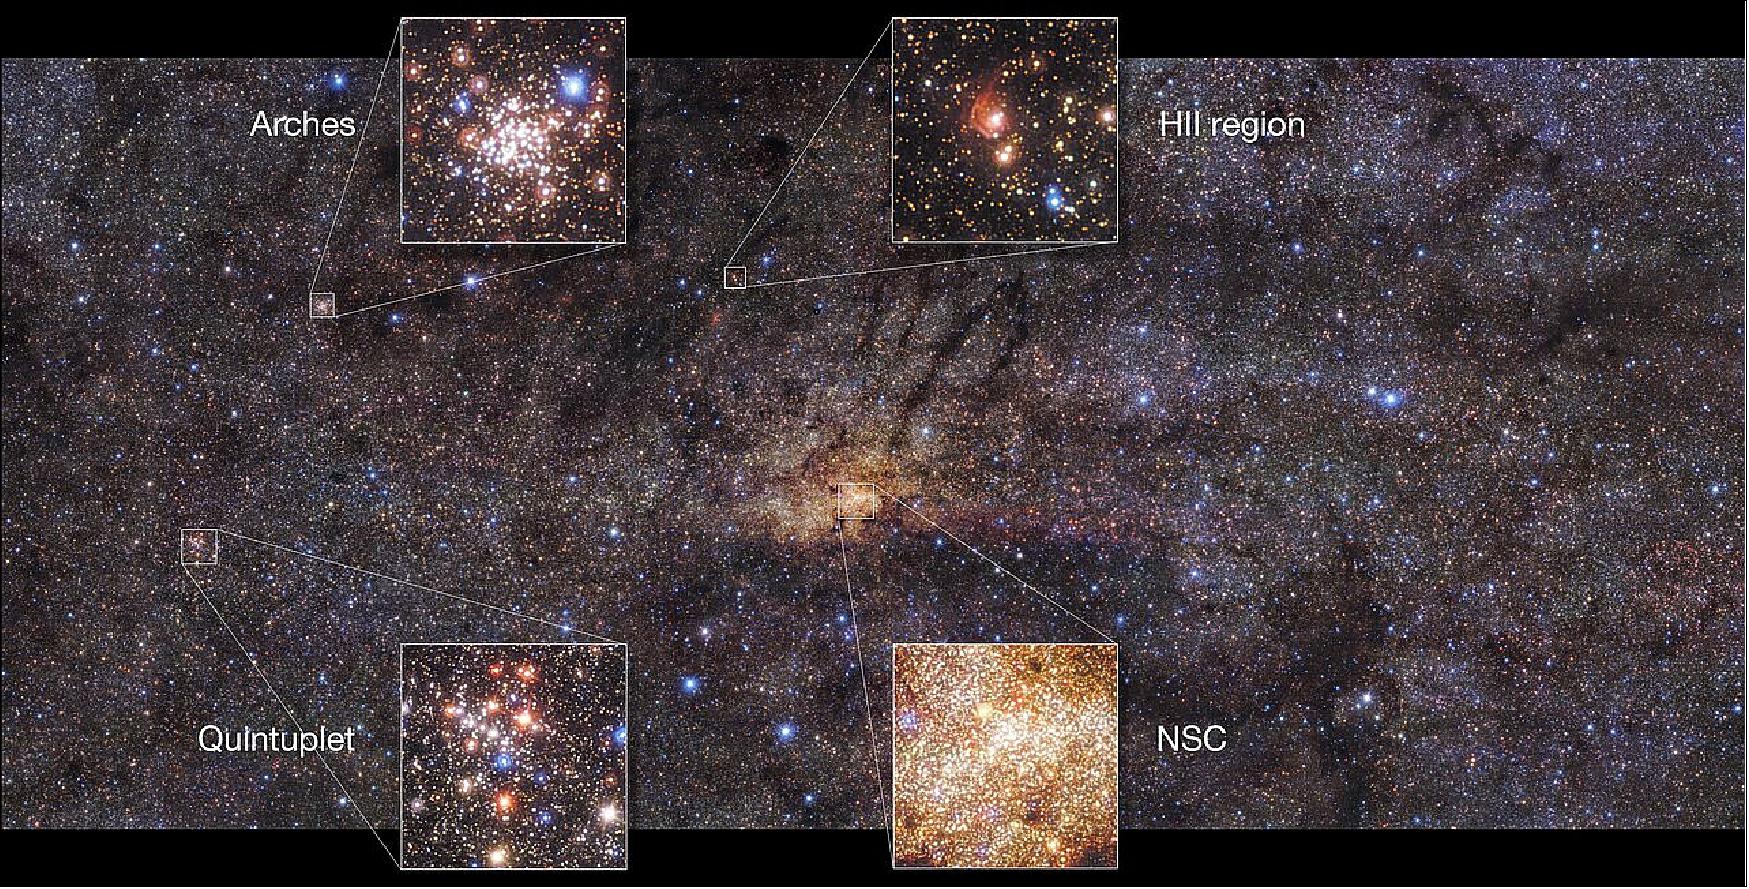 Figure 44: This beautiful image of the Milky Way’s central region, taken with the HAWK-I instrument on ESO’s Very Large Telescope, shows interesting features of this part of our galaxy. This image highlights the Nuclear Star Cluster (NSC) right in the center and the Arches Cluster, the densest cluster of stars in the Milky Way. Other features include the Quintuplet cluster, which contains five prominent stars, and a region of ionized hydrogen gas (HII), image credit: ESO/Nogueras-Lara et al.